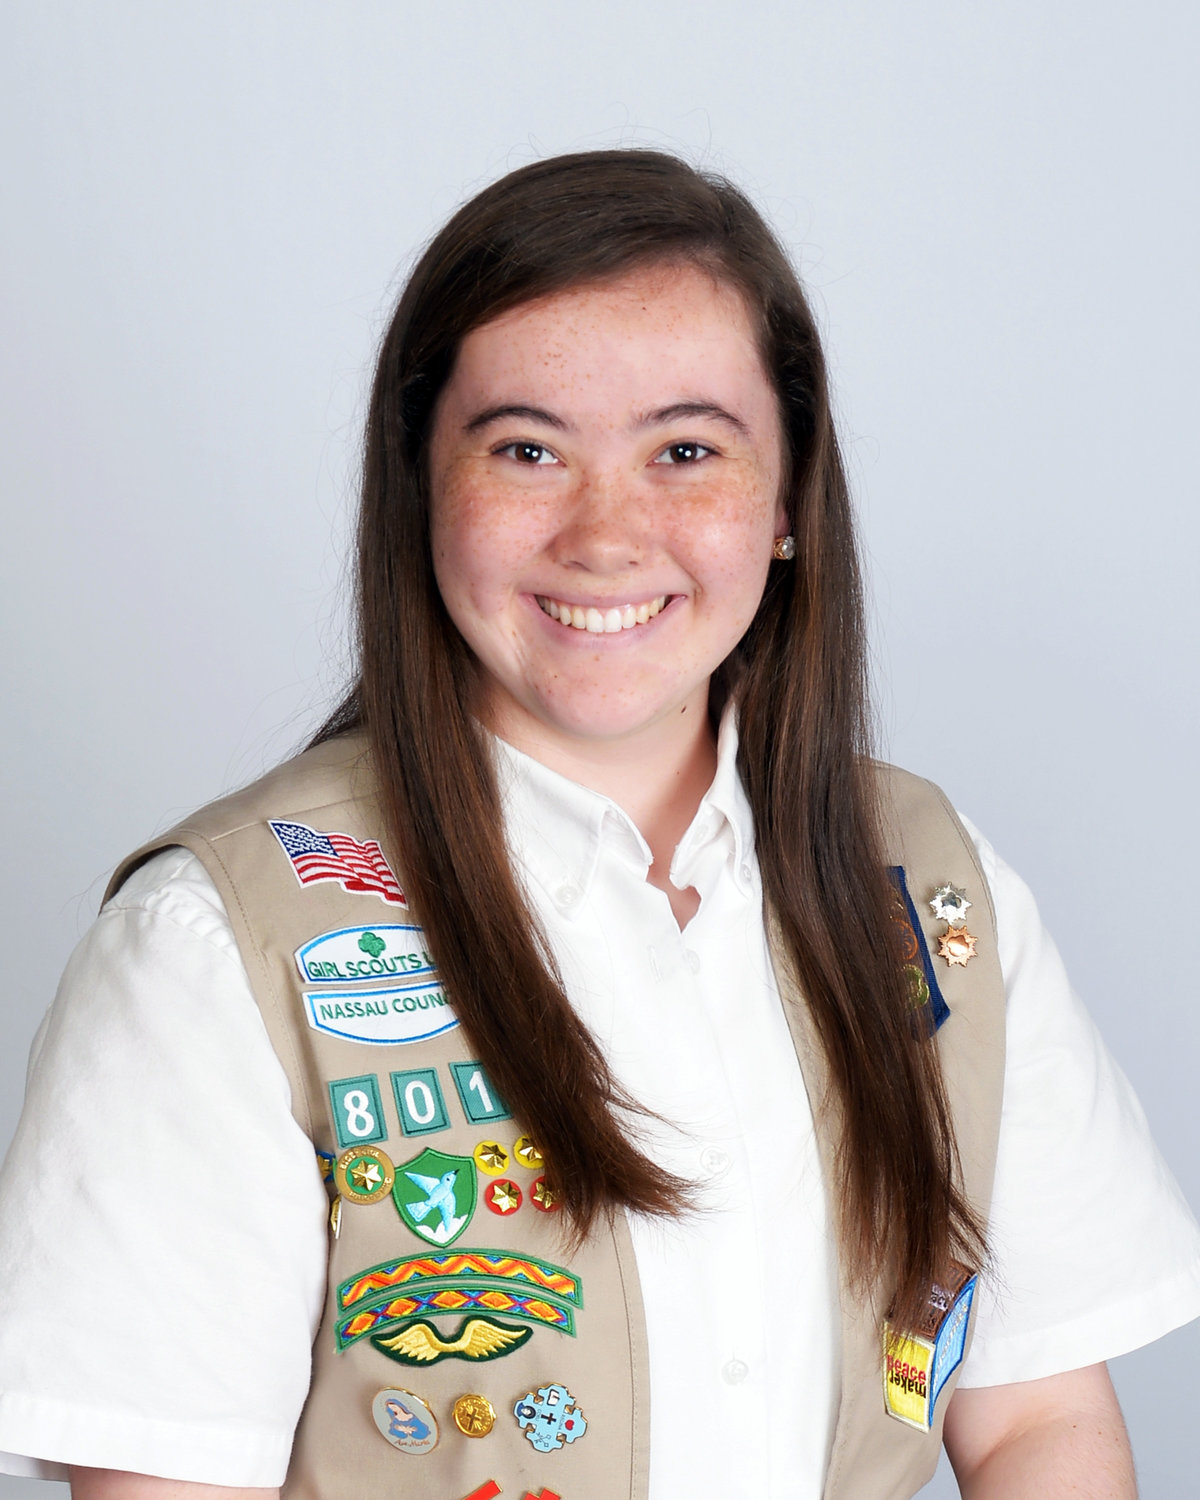 girl-scout-receives-award-for-her-work-herald-community-newspapers